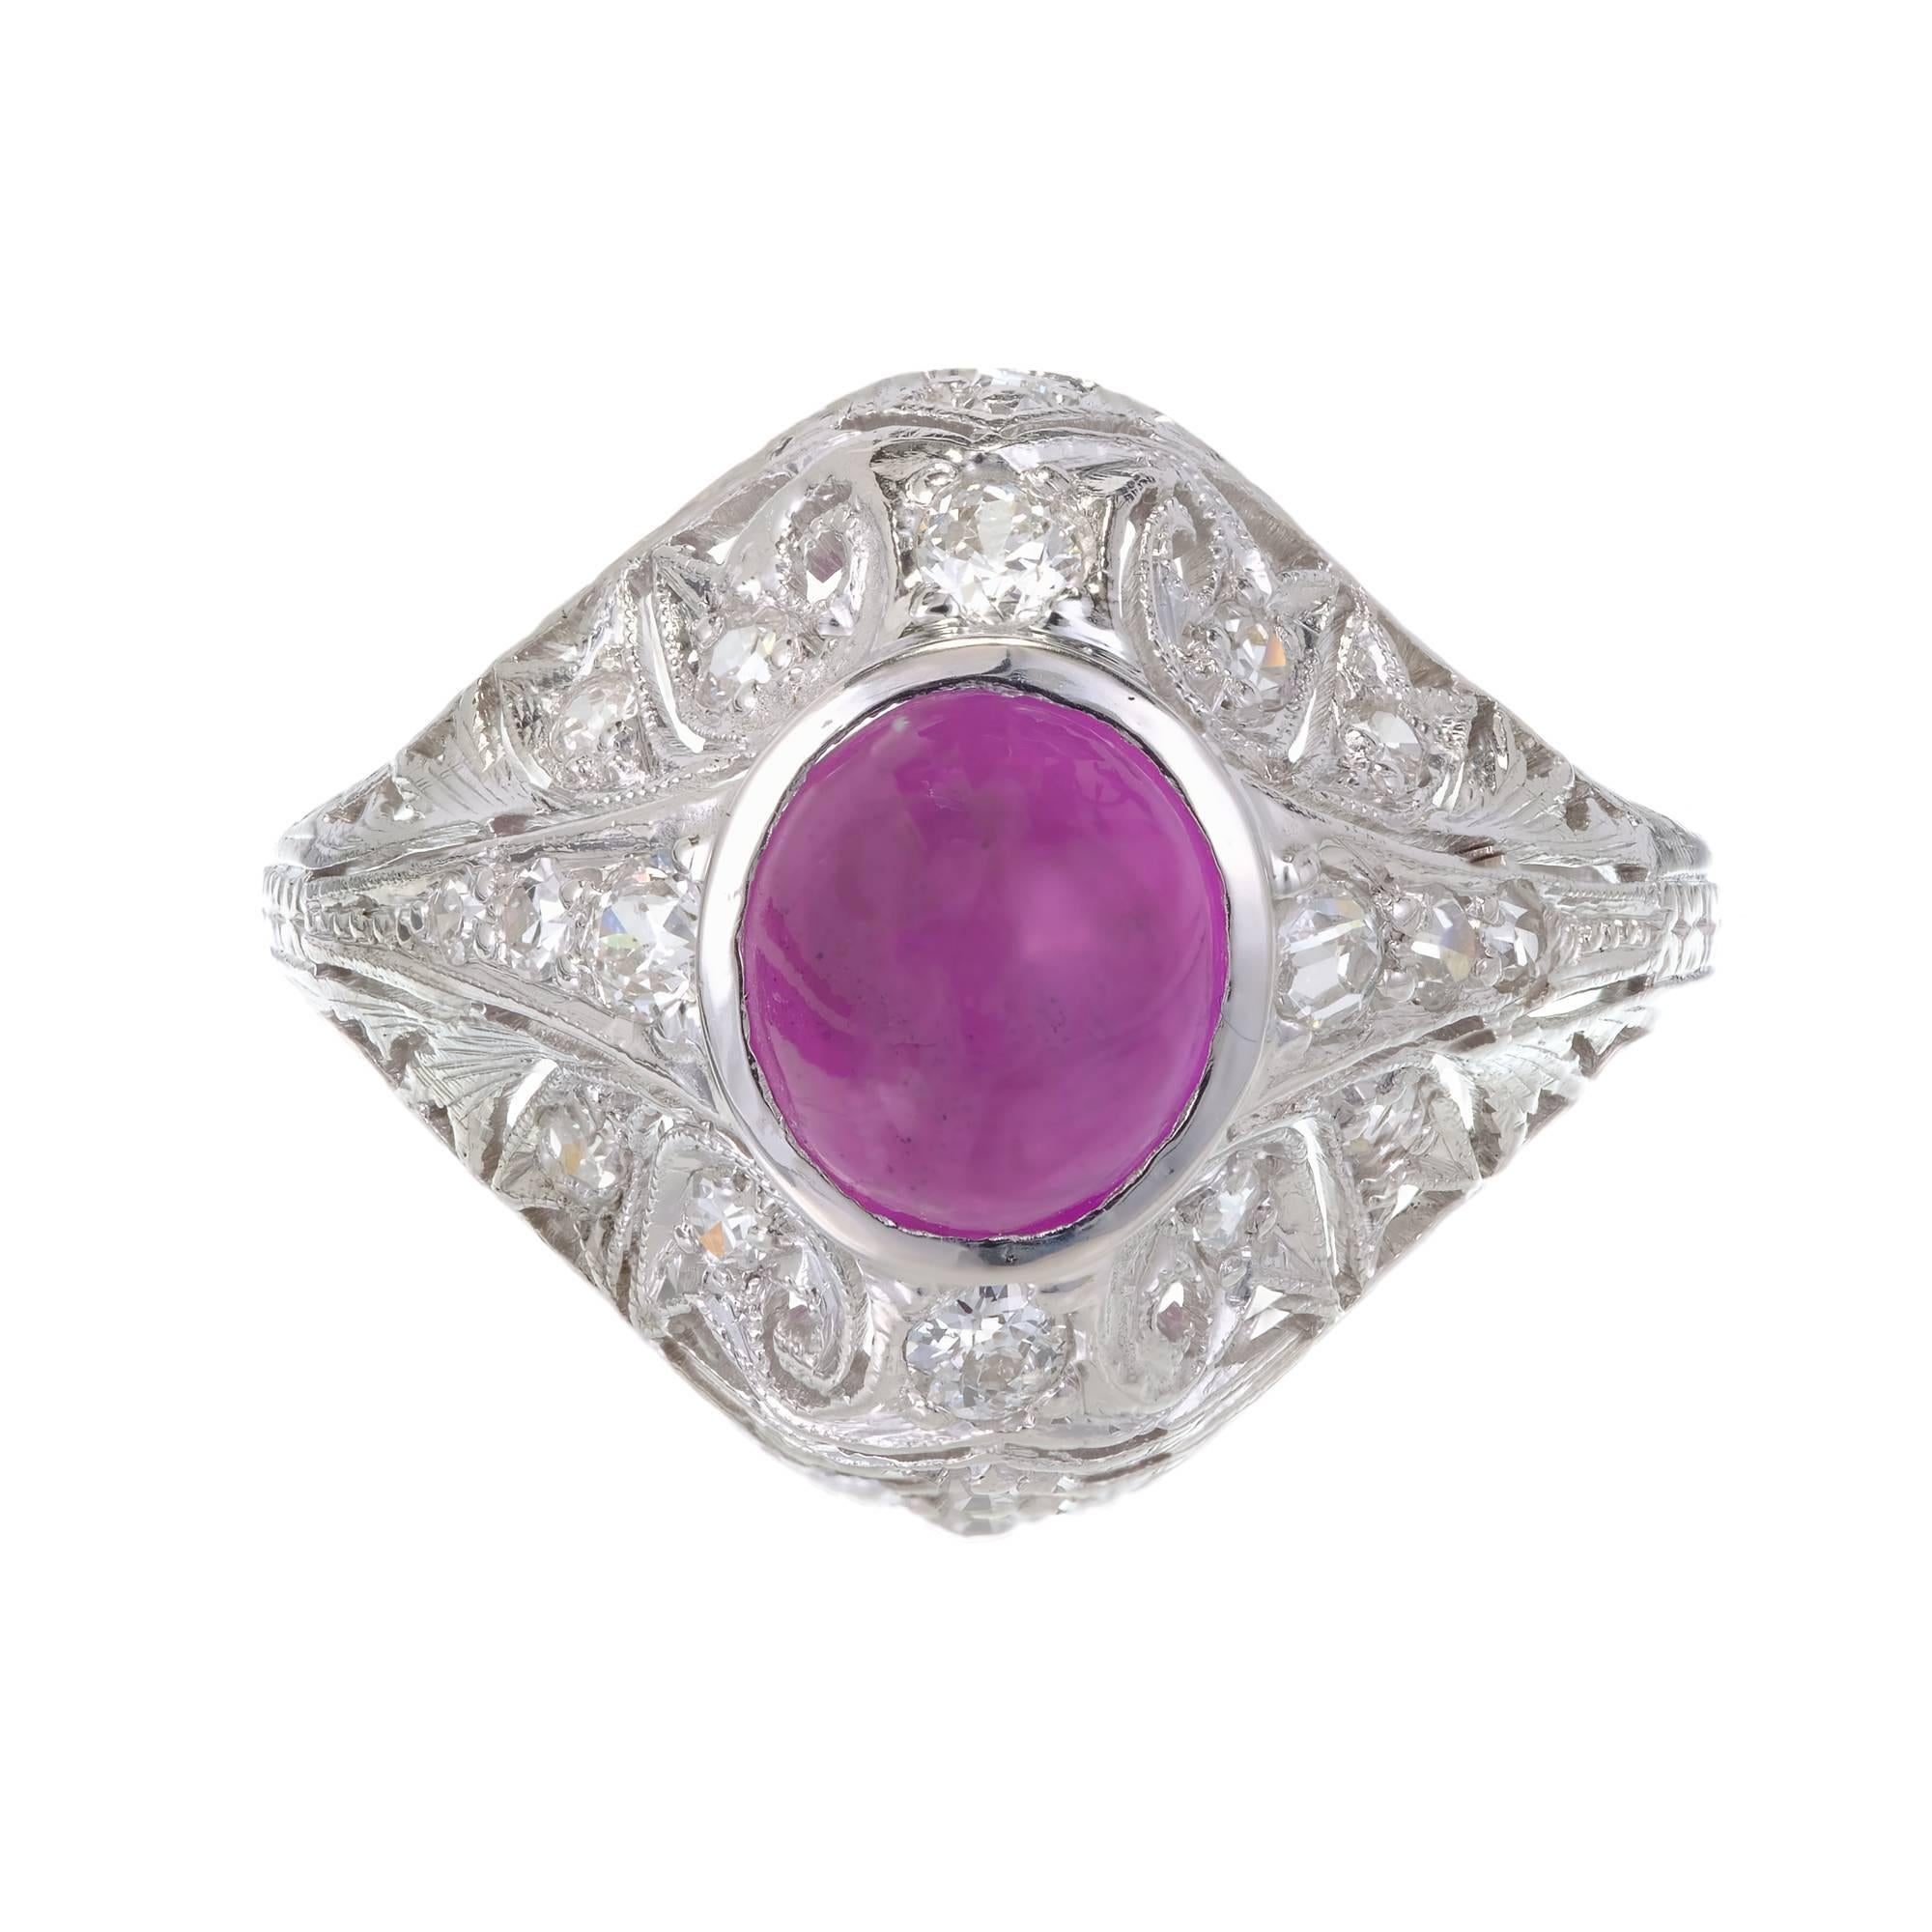 GIA Certified 3.40 Carat Star Ruby Diamond Art Deco 1920s Platinum Cocktail Ring For Sale